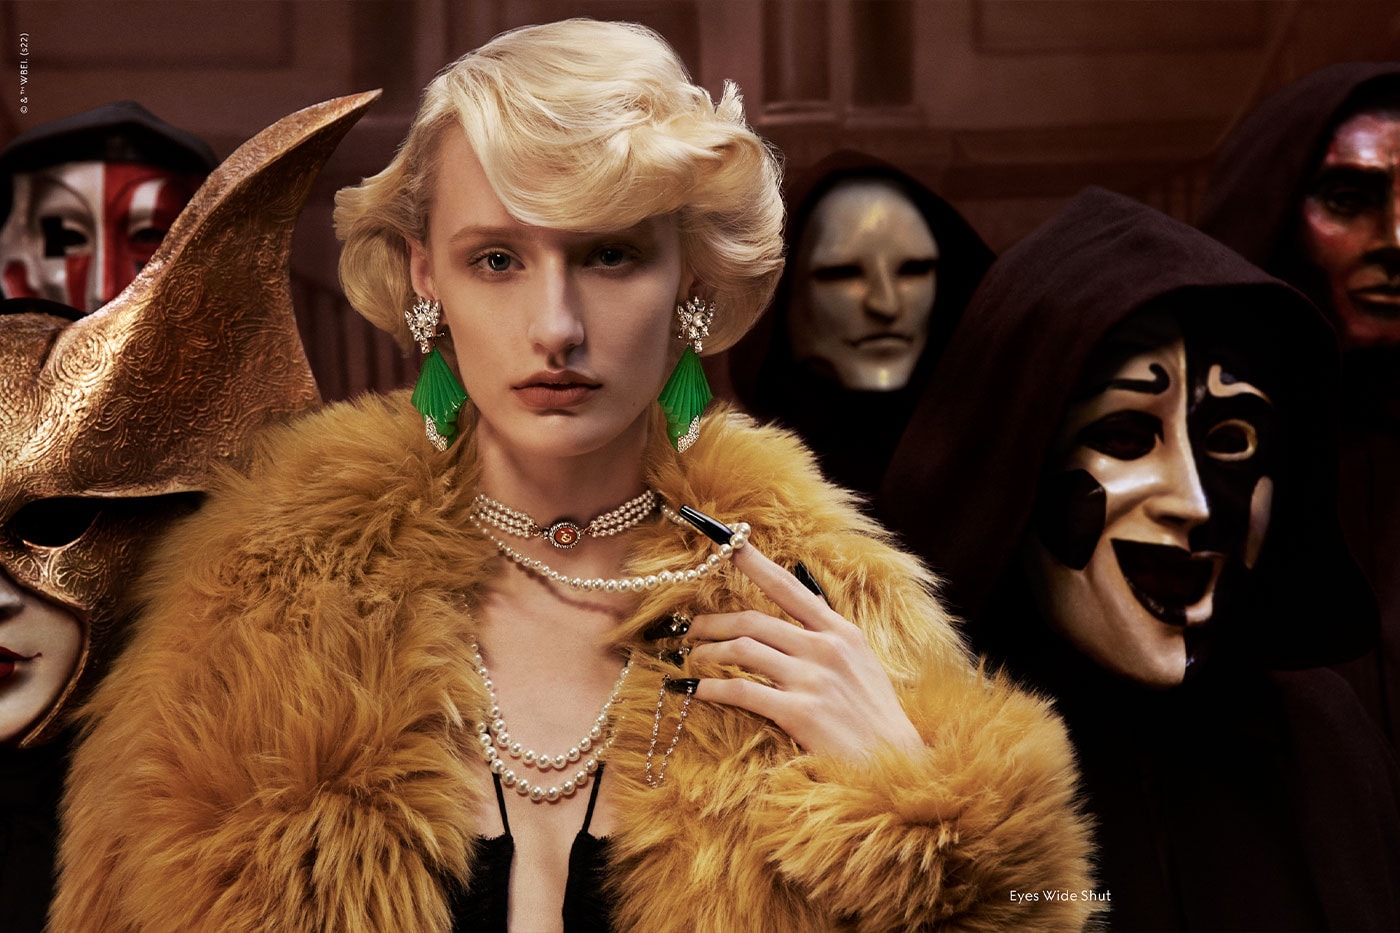 Gucci's Latest 'Exquisite' Campaign Recreates Scenes From Stanley Kubrick Films the shining a clockwork orange 2001: a space odyssey eyes wide shut